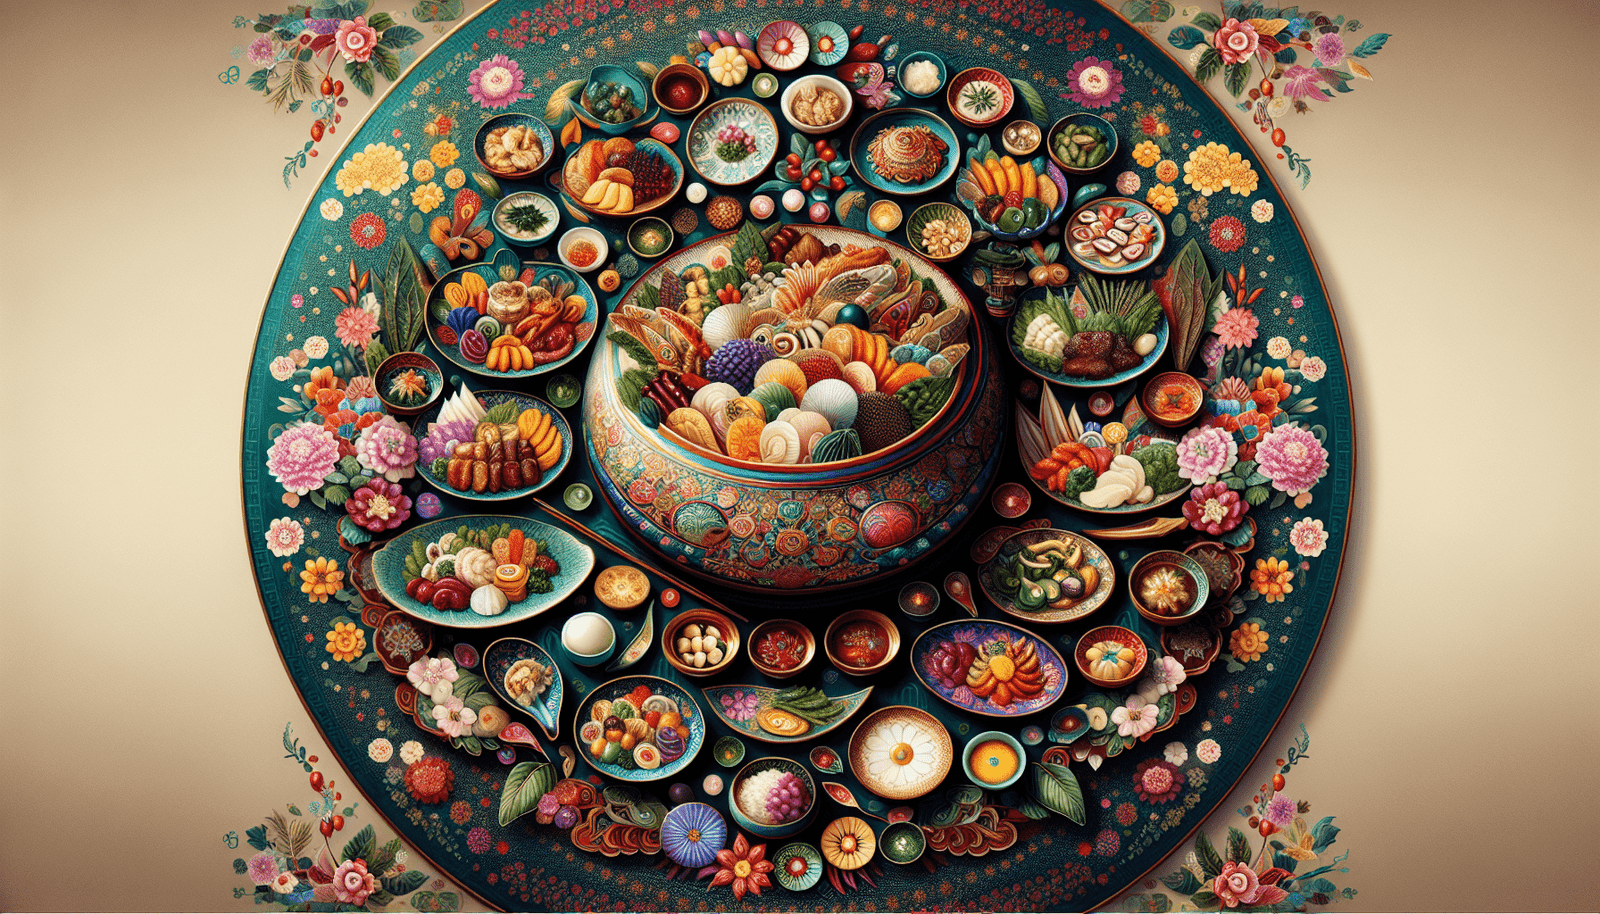 Can You Share Insights Into The Historical Origins Of Traditional Korean Royal Court Cuisine?